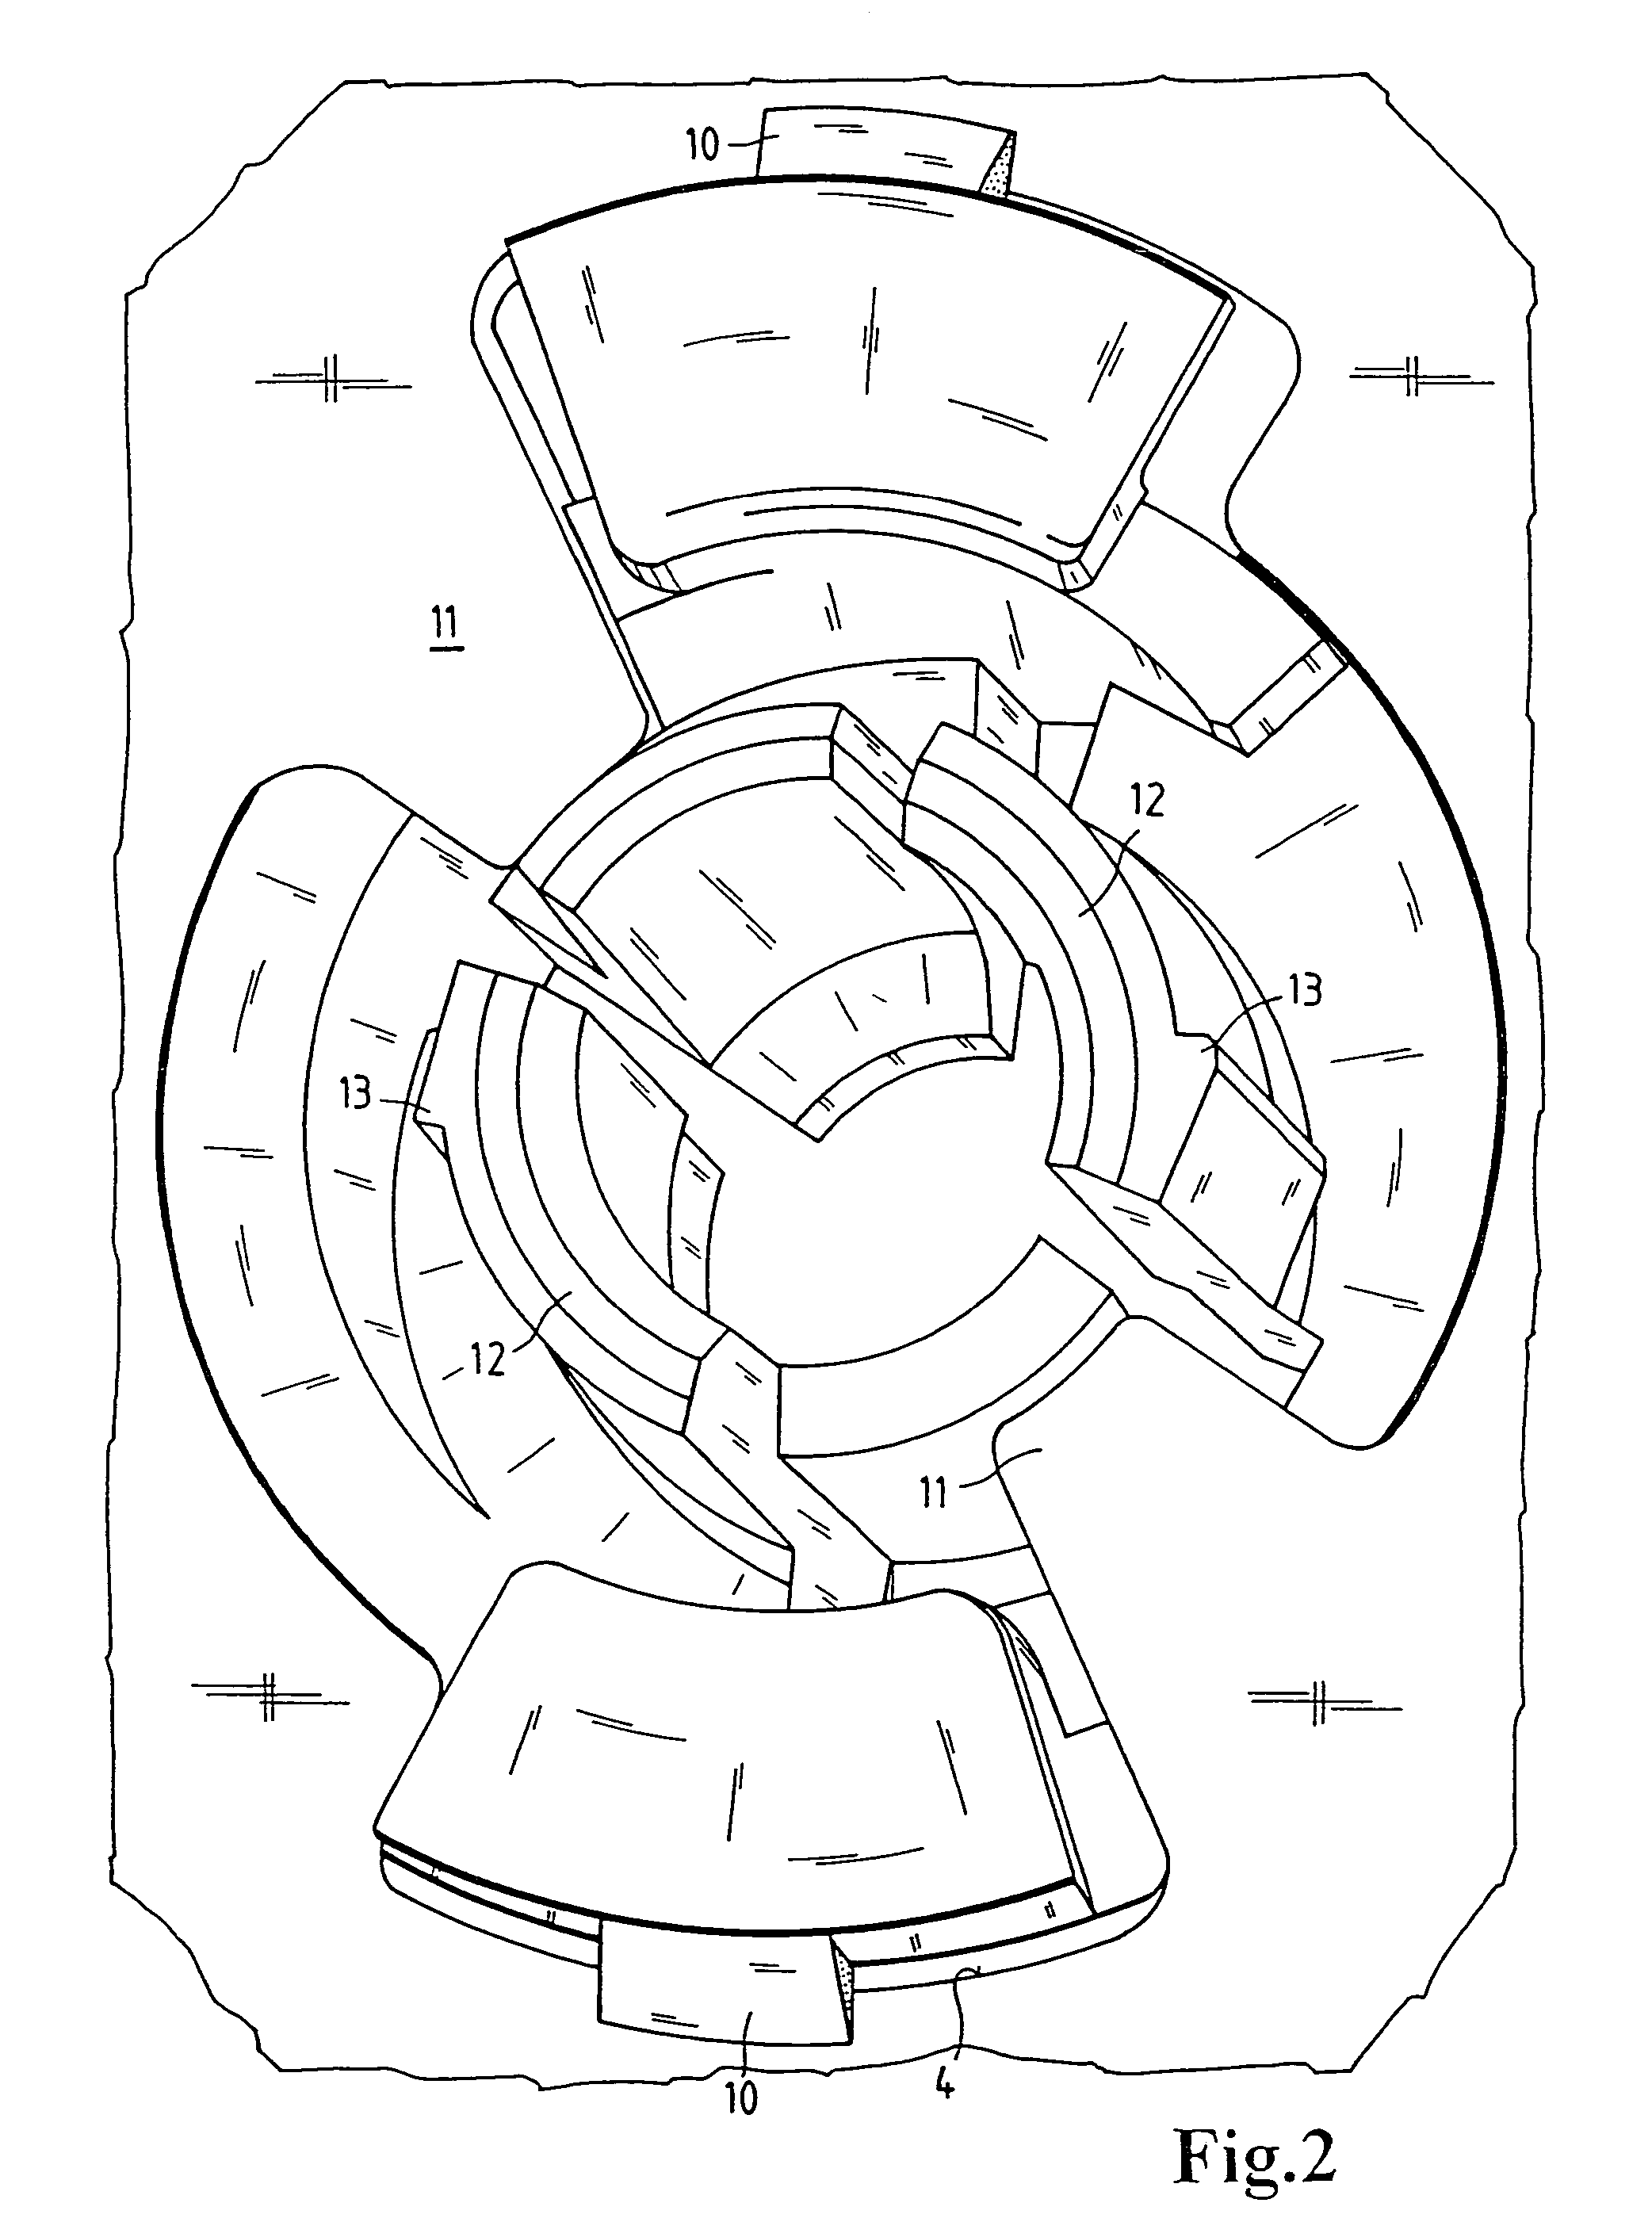 Positioning device for adjustable housing